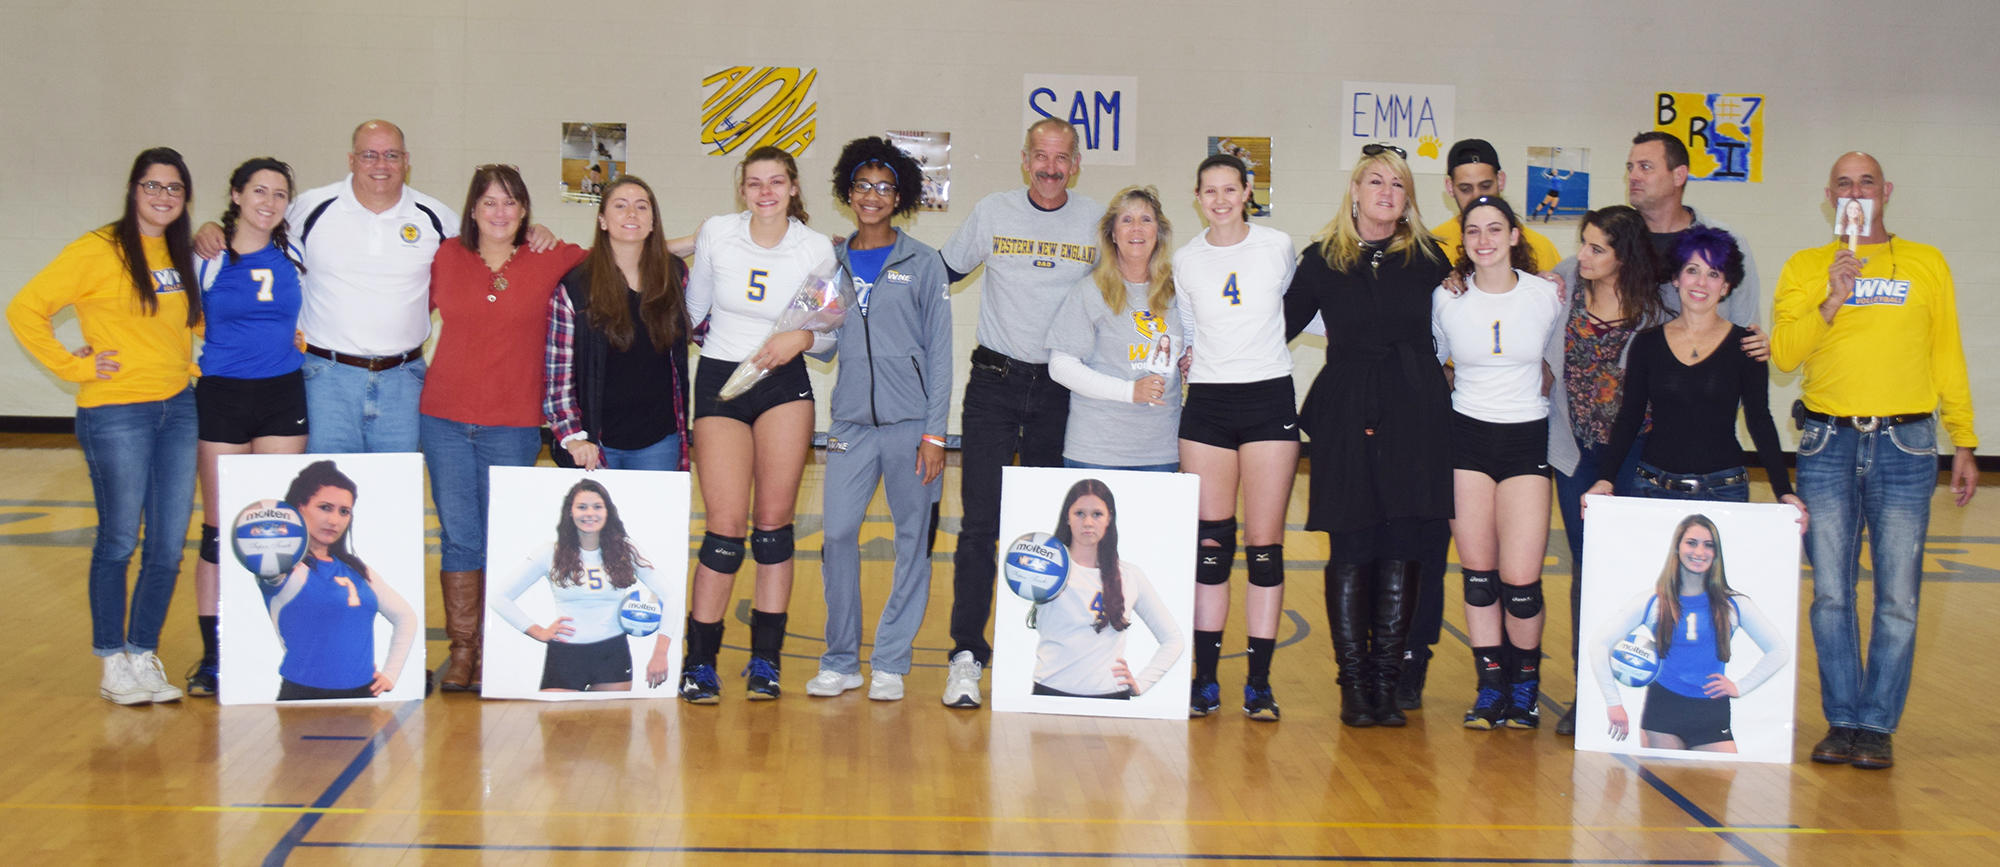 Golden Bears Celebrate Senior Day With 3-0 Wins over Curry & Keene State